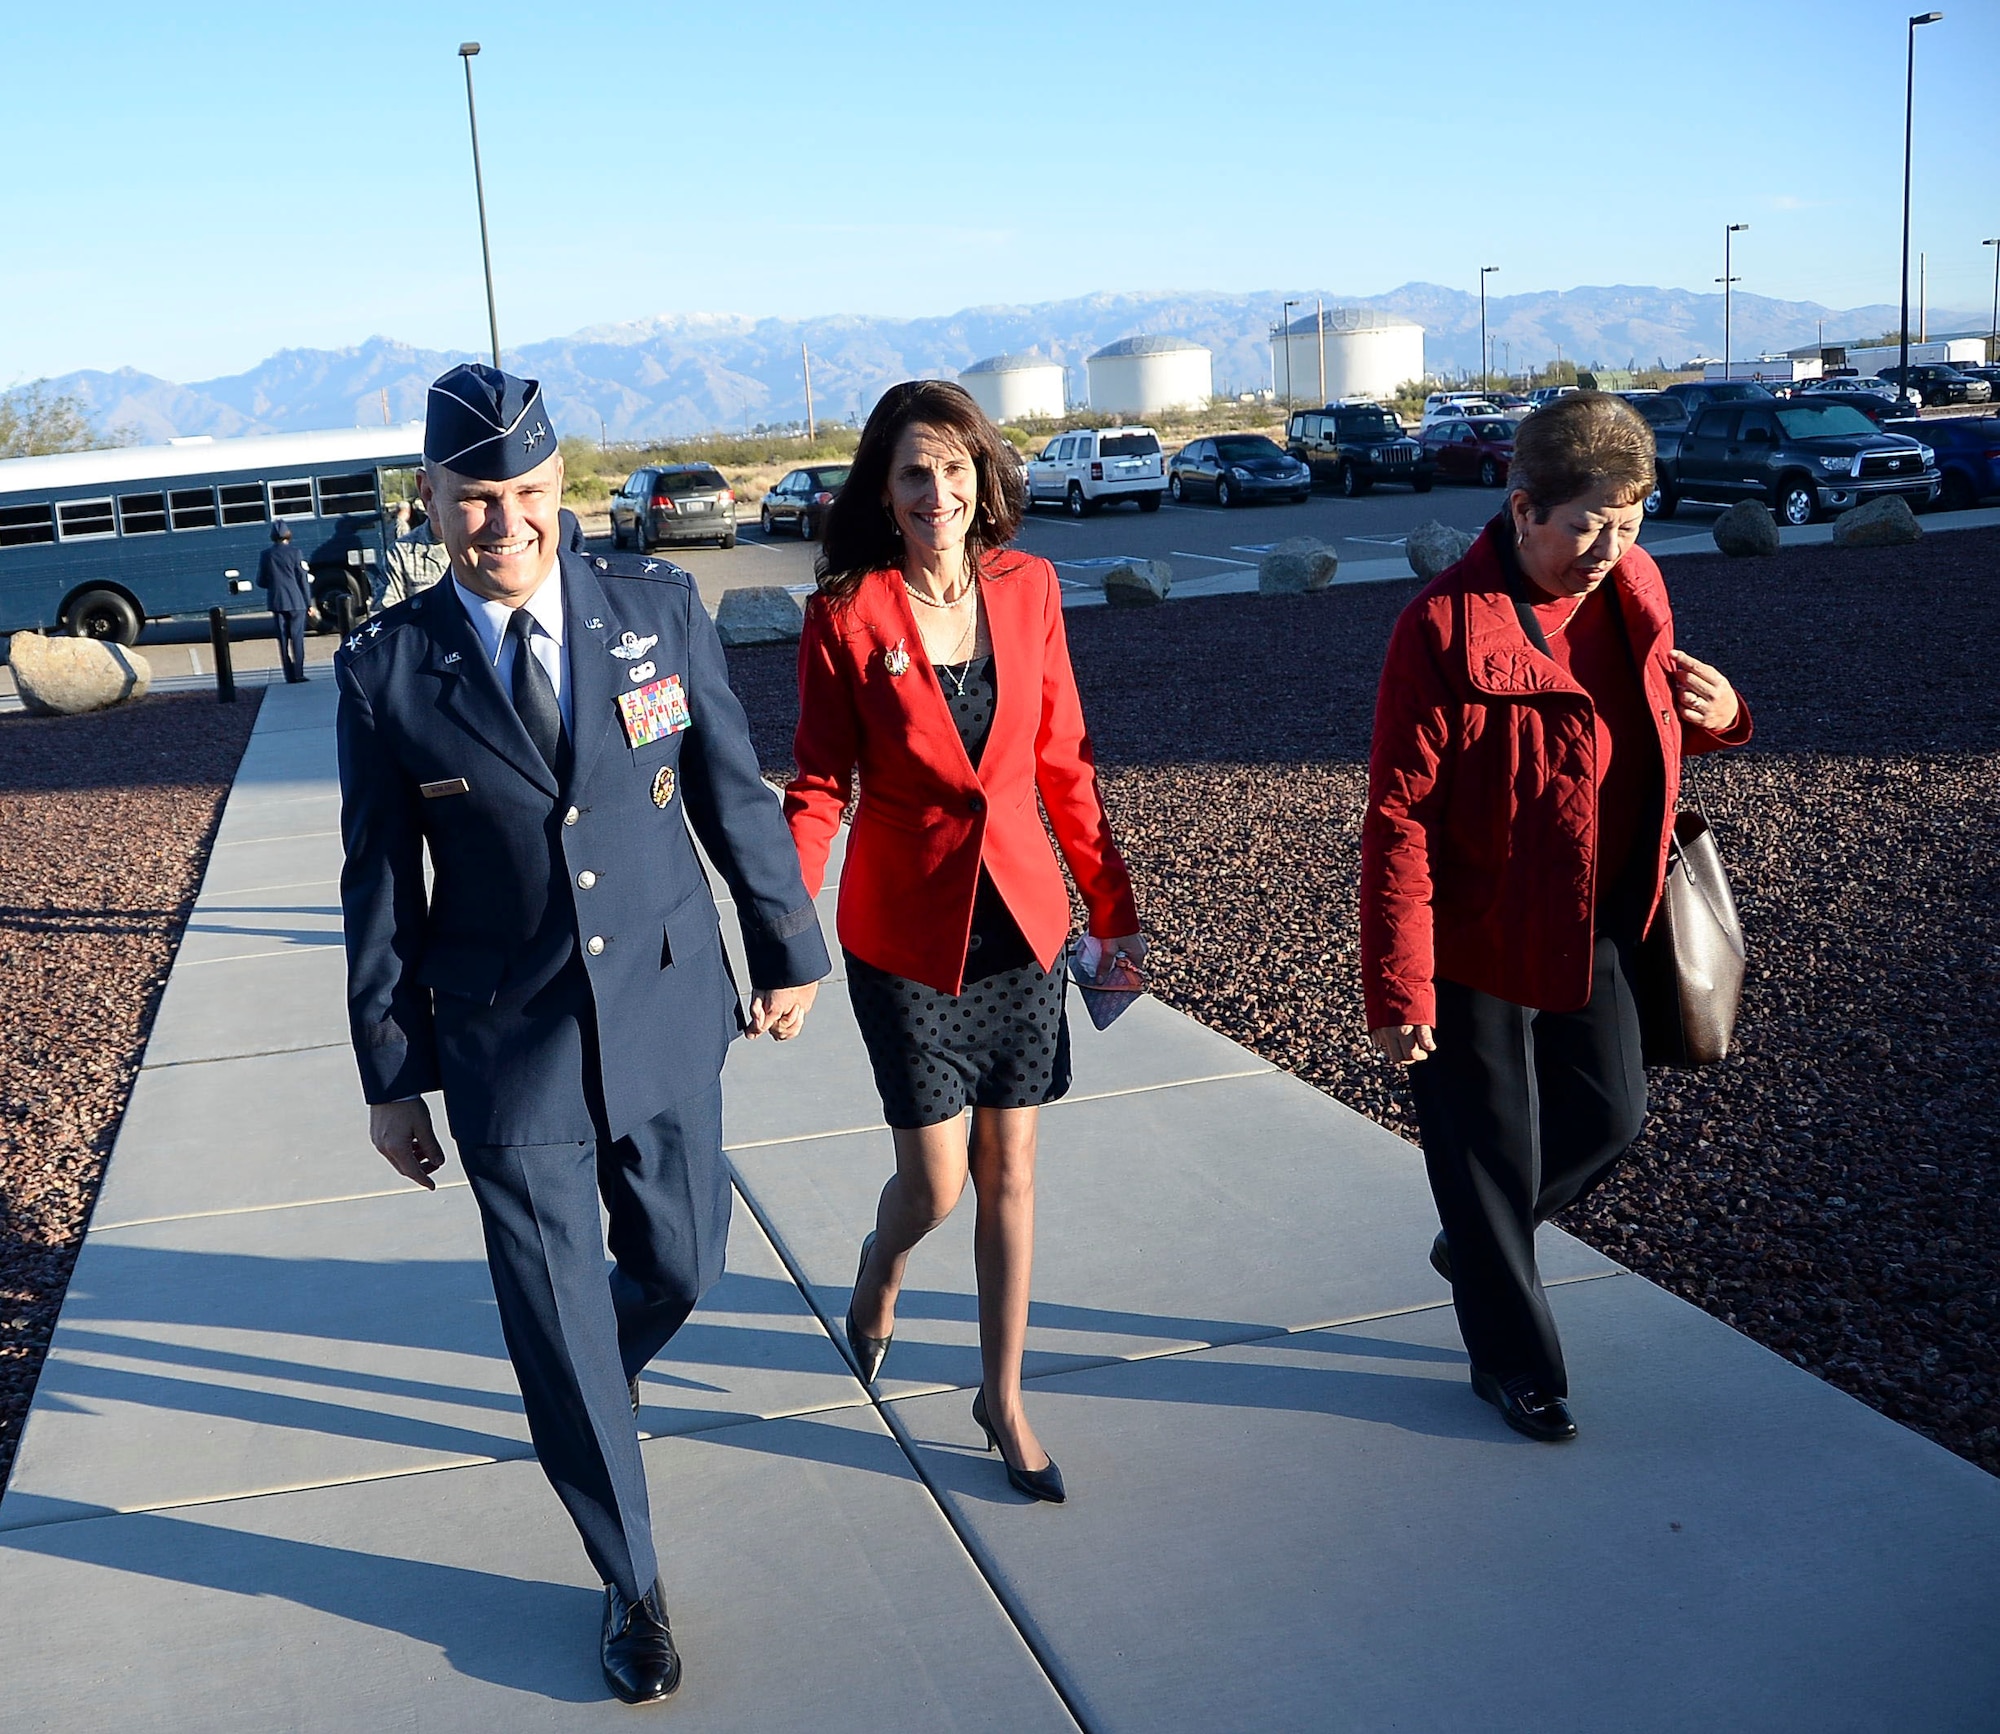 Maj. Gen. Chris Nowland, 12th Air Force (Air Forces Southern) incoming commander, and his wife Kristan walk together towards the 43rd Electronic Combat Squadron at Davis-Monthan AFB, Ariz., Dec. 19, 2014. Nowland was promoted to the rank of Lt. Gen. in a ceremony held at the 43rd ECS. (U.S. Air Force photo by Staff Sgt. Adam Grant/Released)